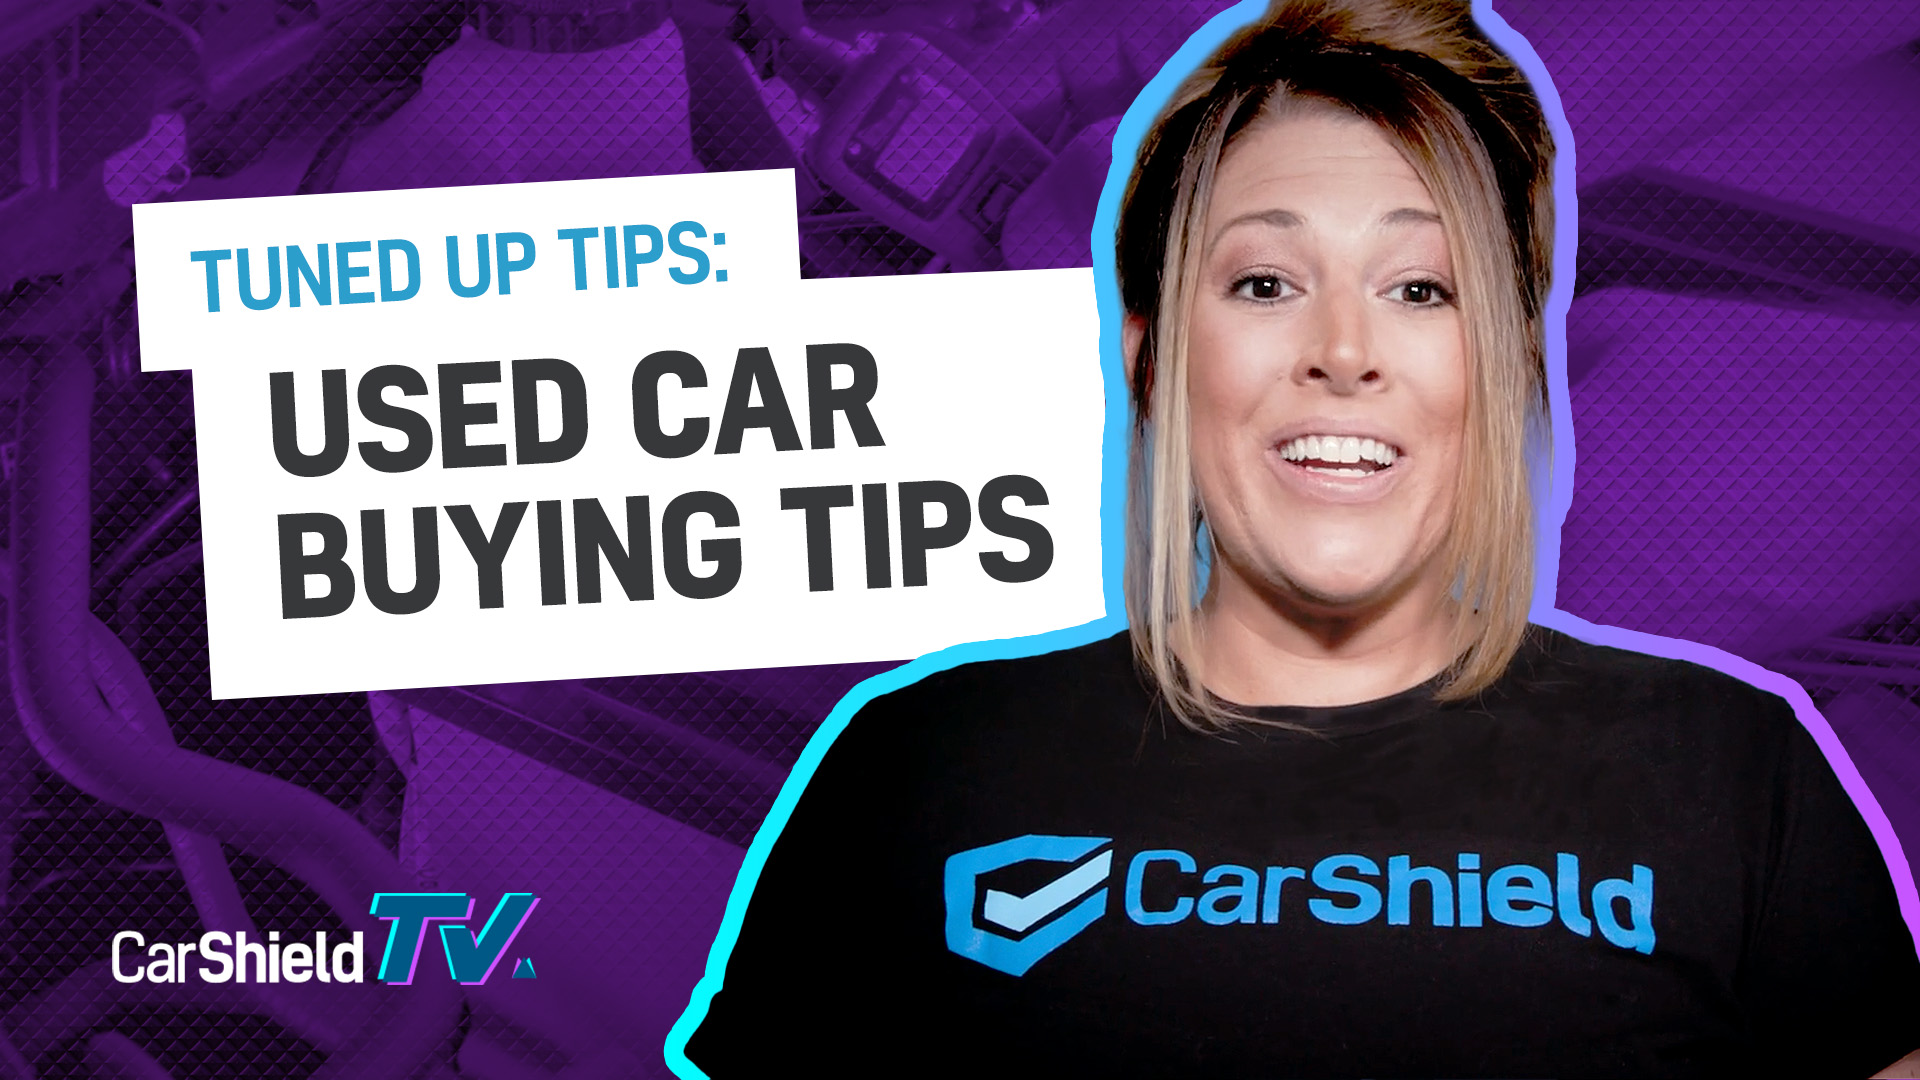 Tips for buying a new car